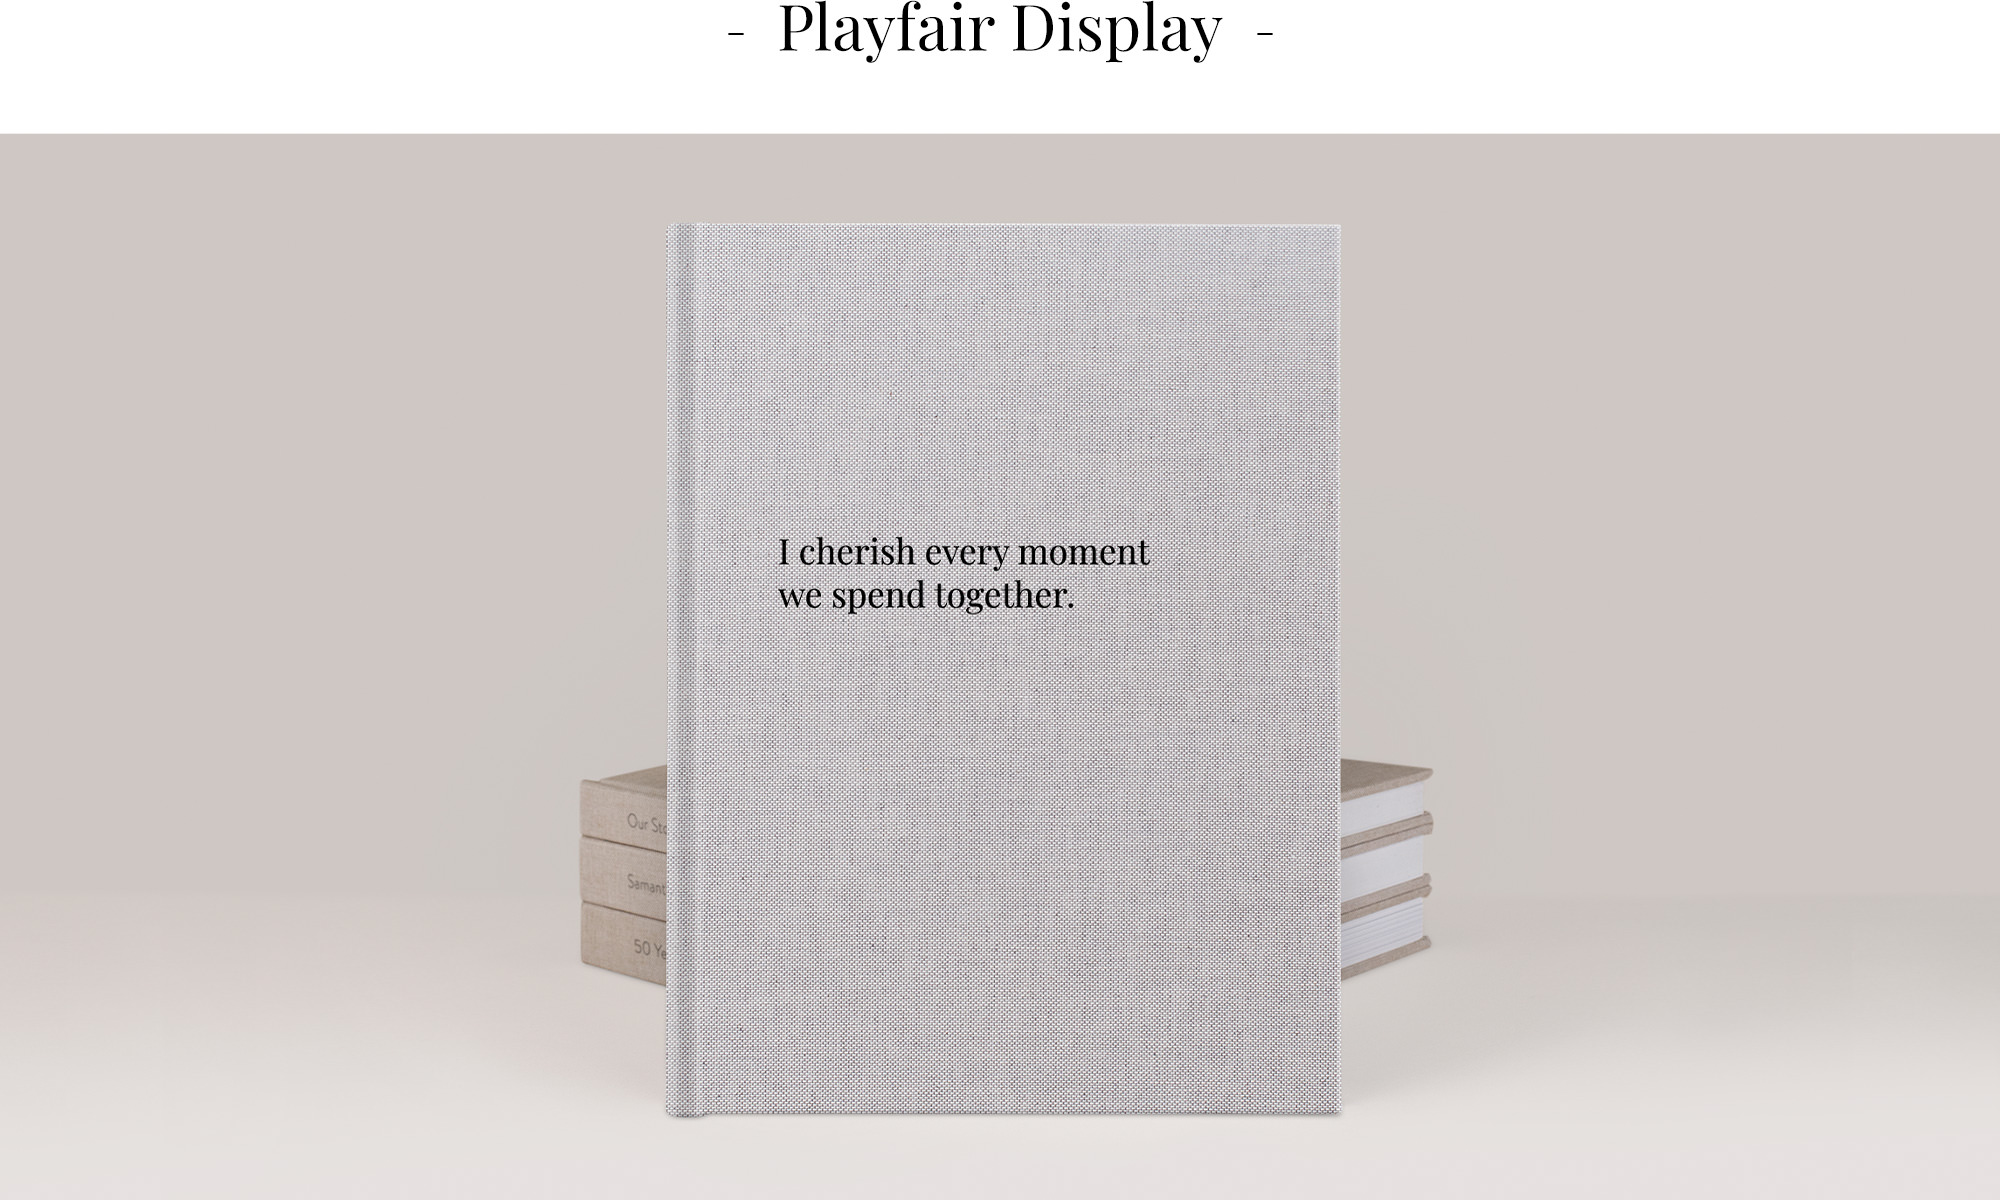 Premium Photo Book with Playfair Display font title